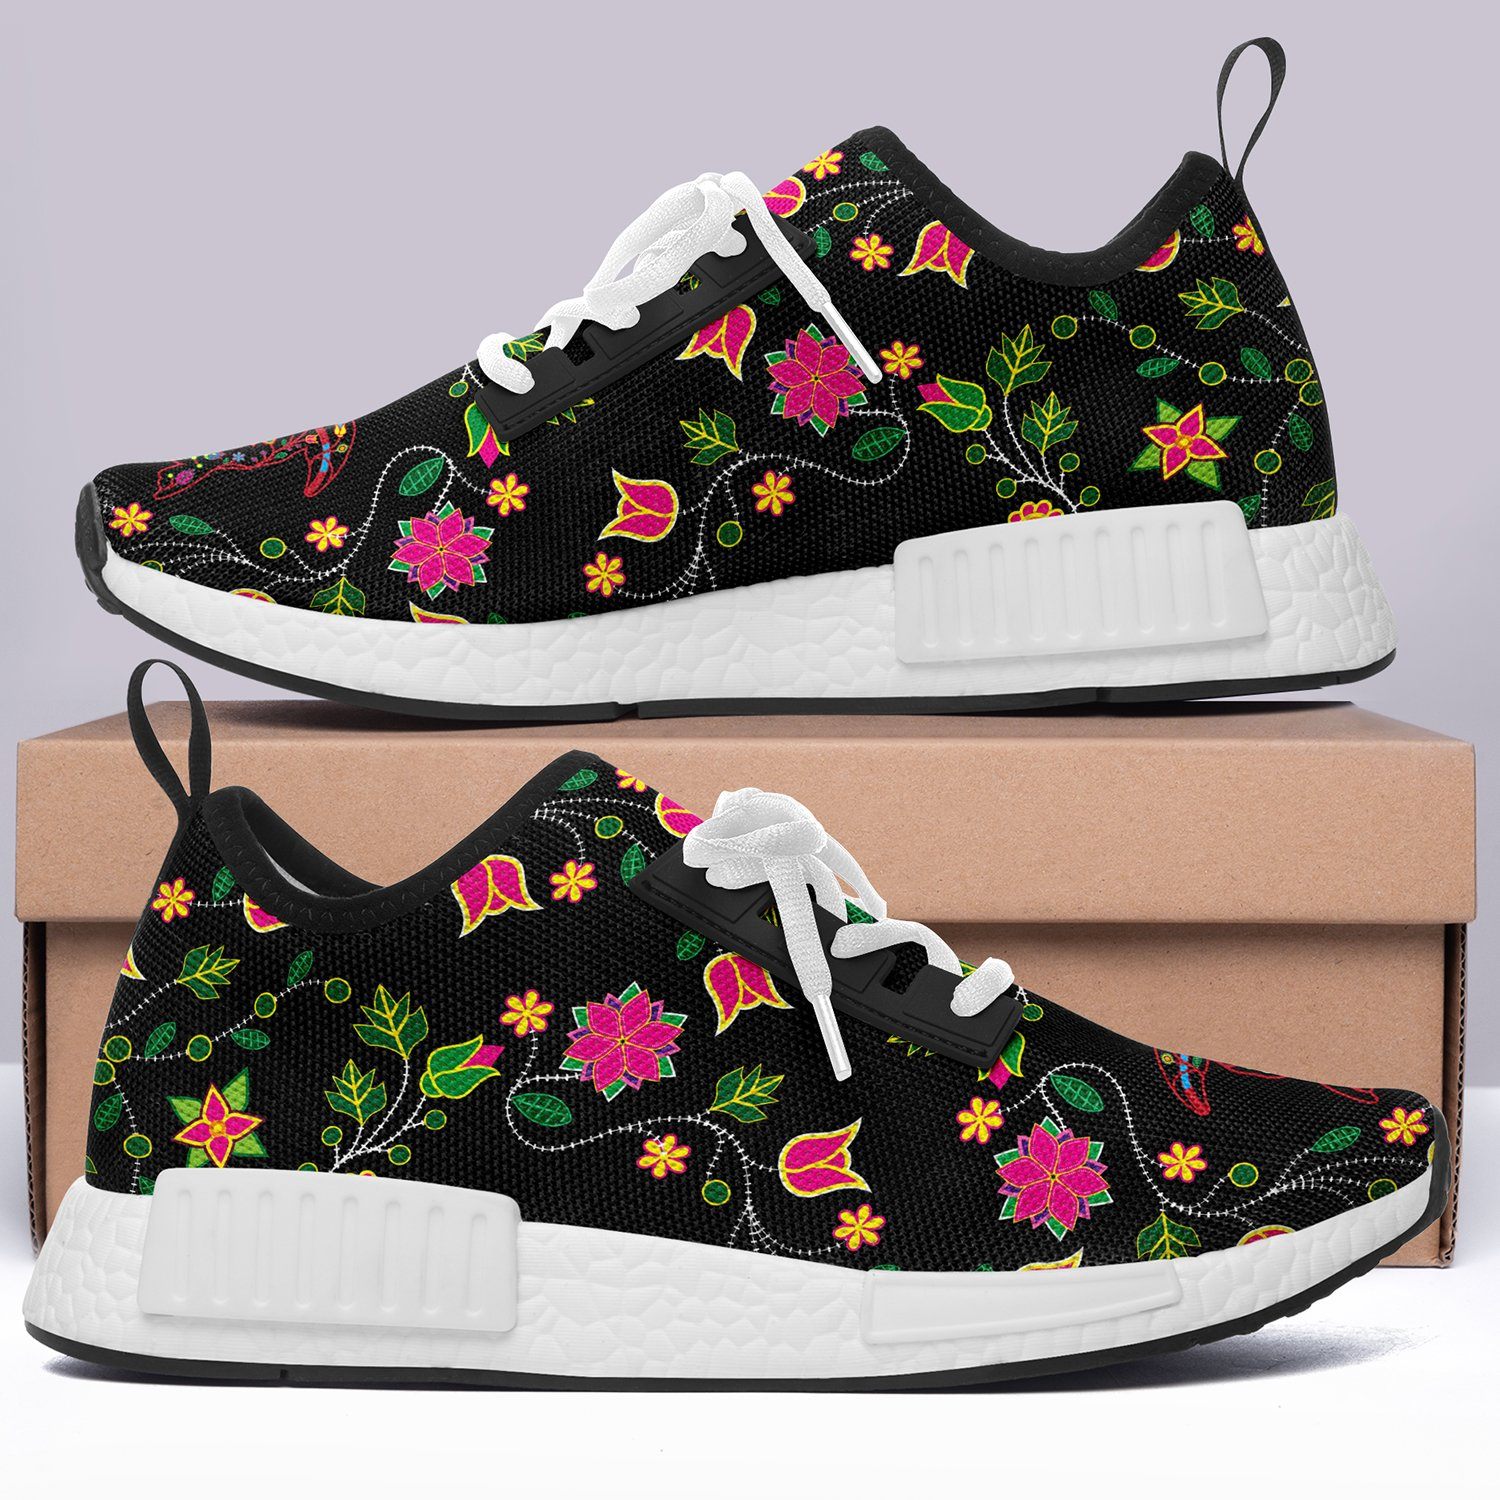 Floral Turtle Draco Running Shoes 49 Dzine 